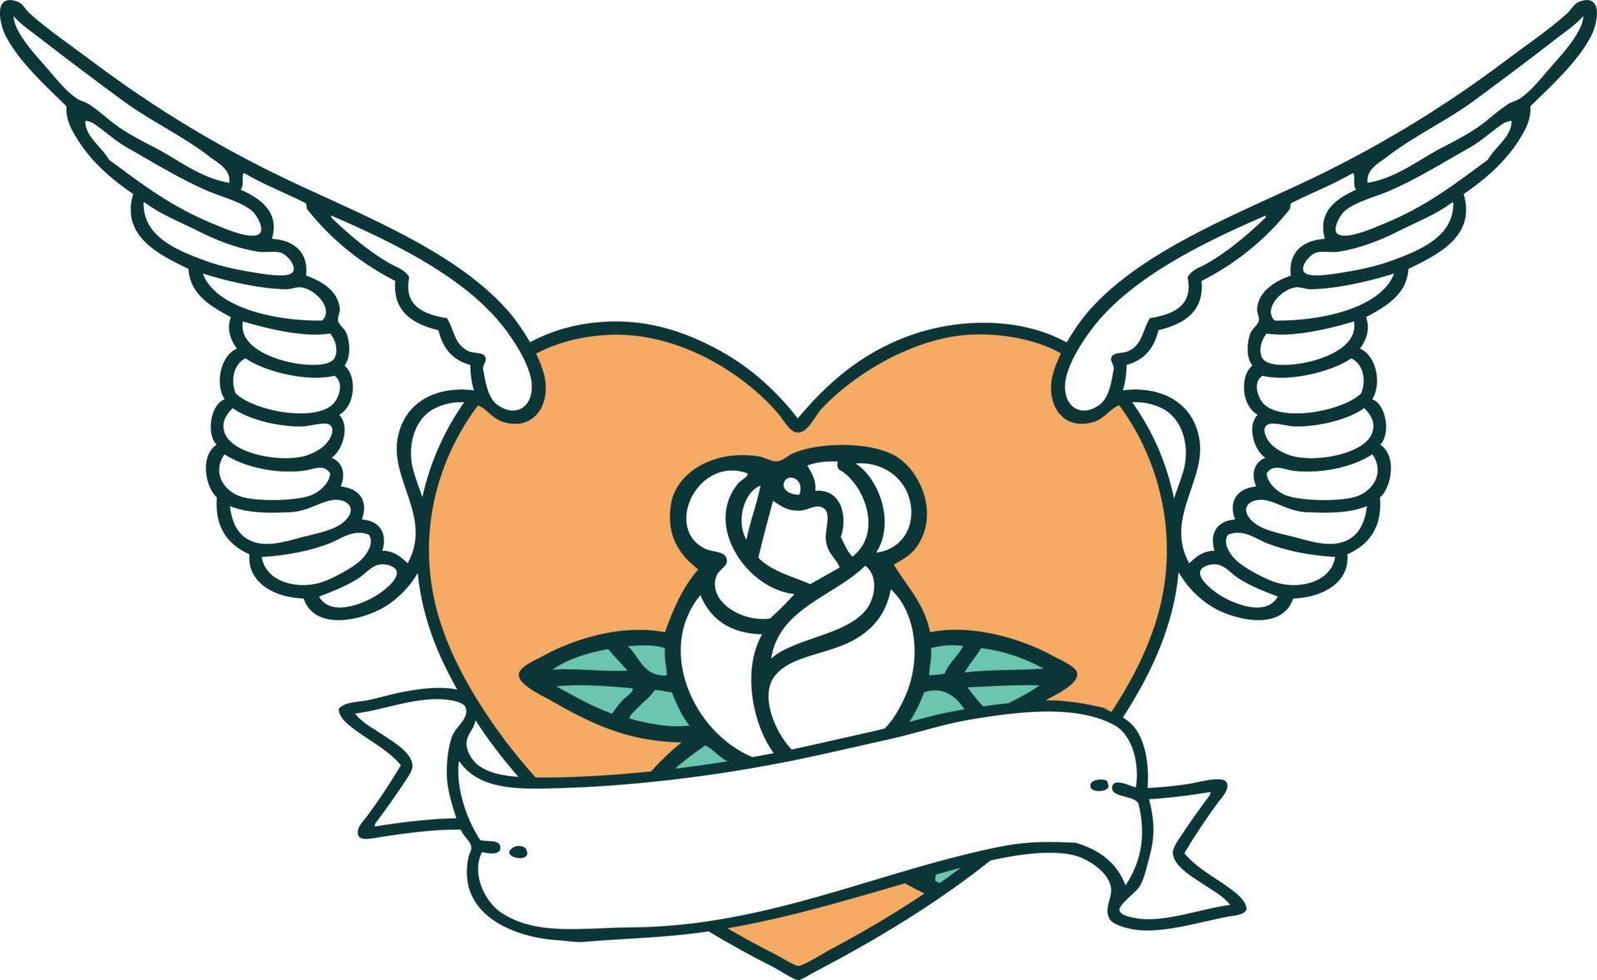 iconic tattoo style image of a flying heart with flowers and banner vector